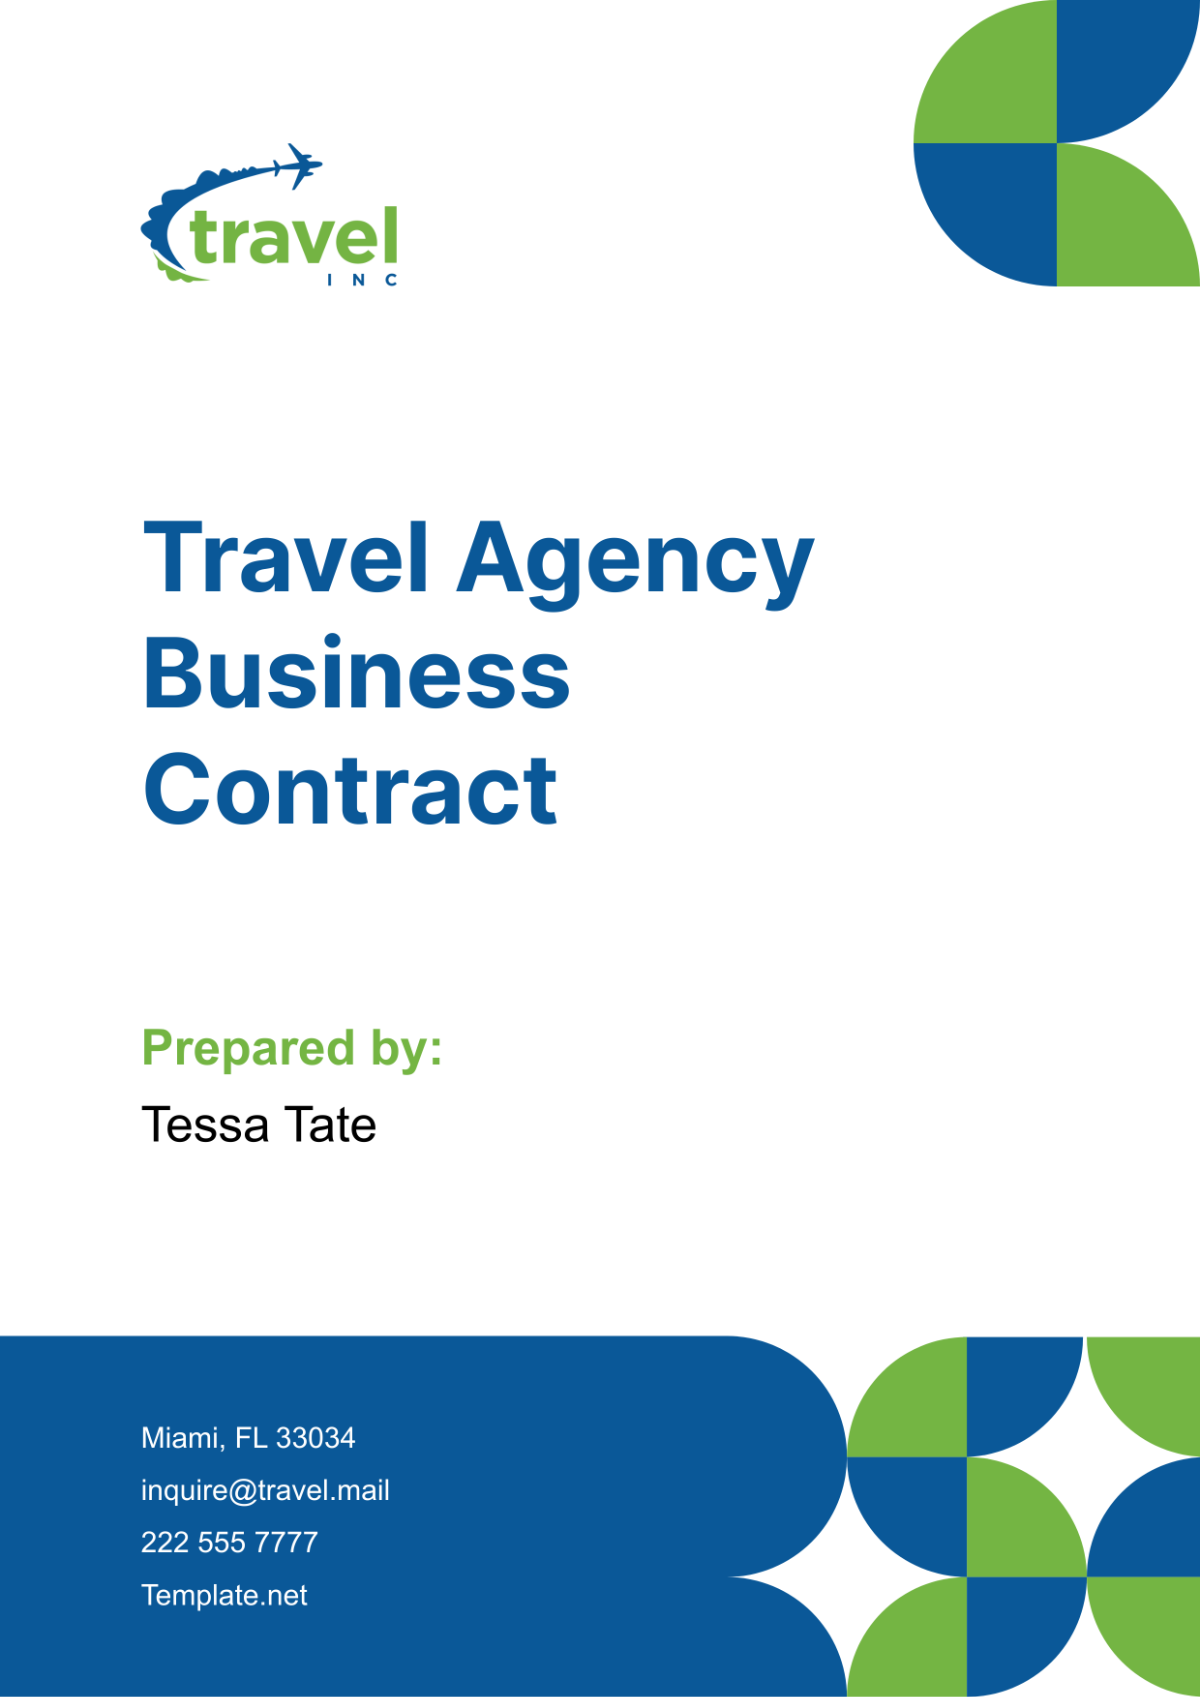 Travel Agency Business Contract Template